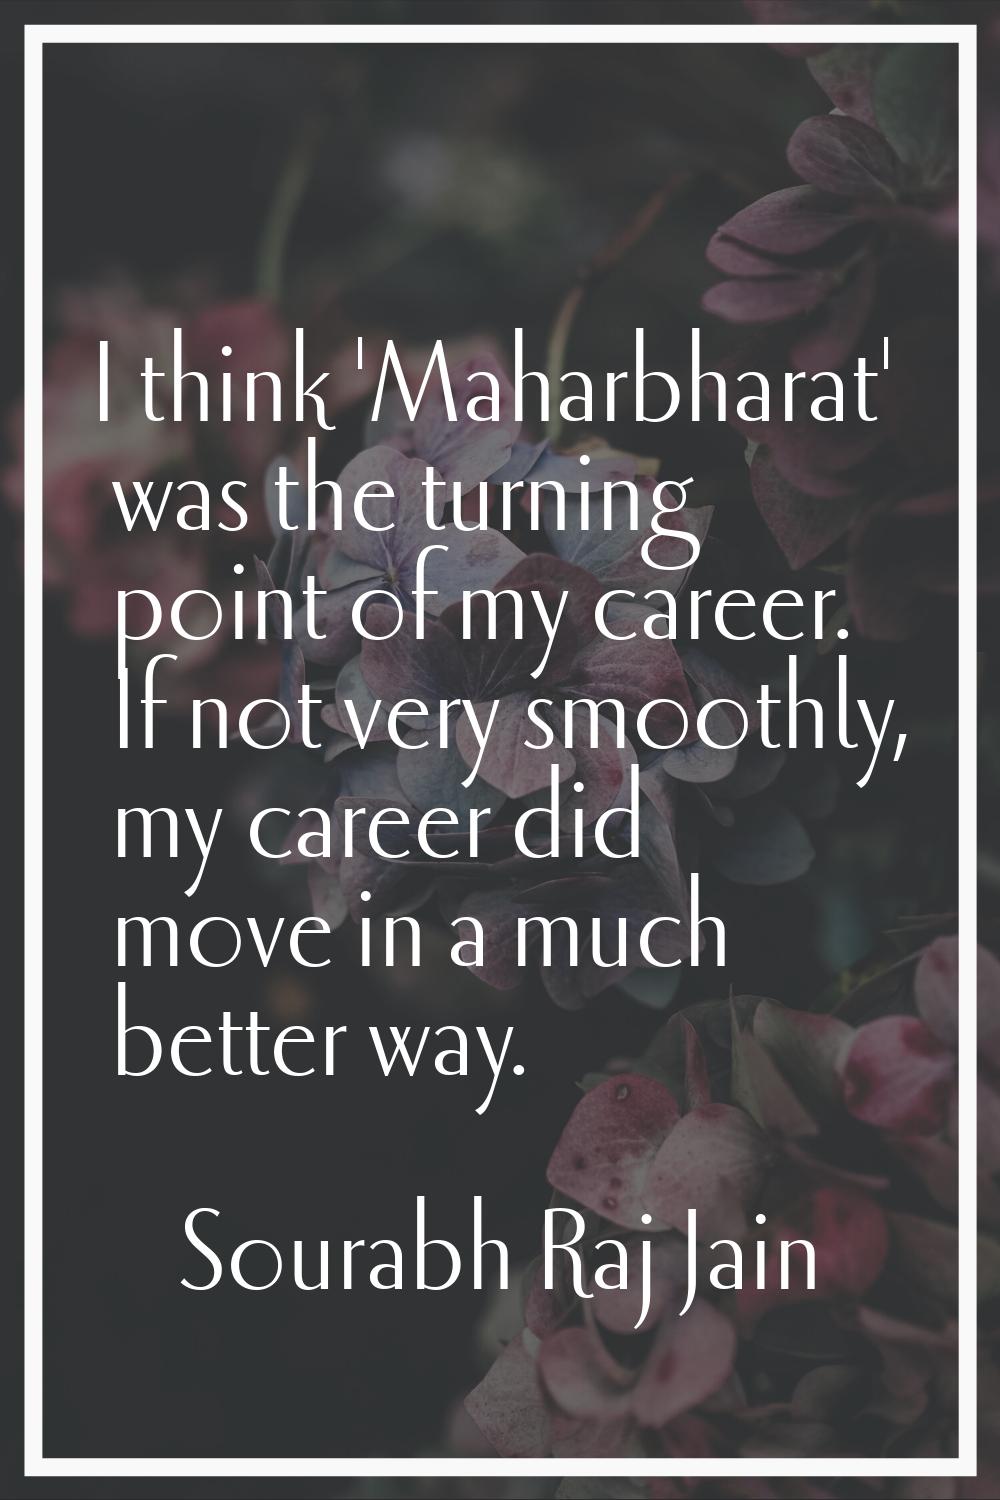 I think 'Maharbharat' was the turning point of my career. If not very smoothly, my career did move 